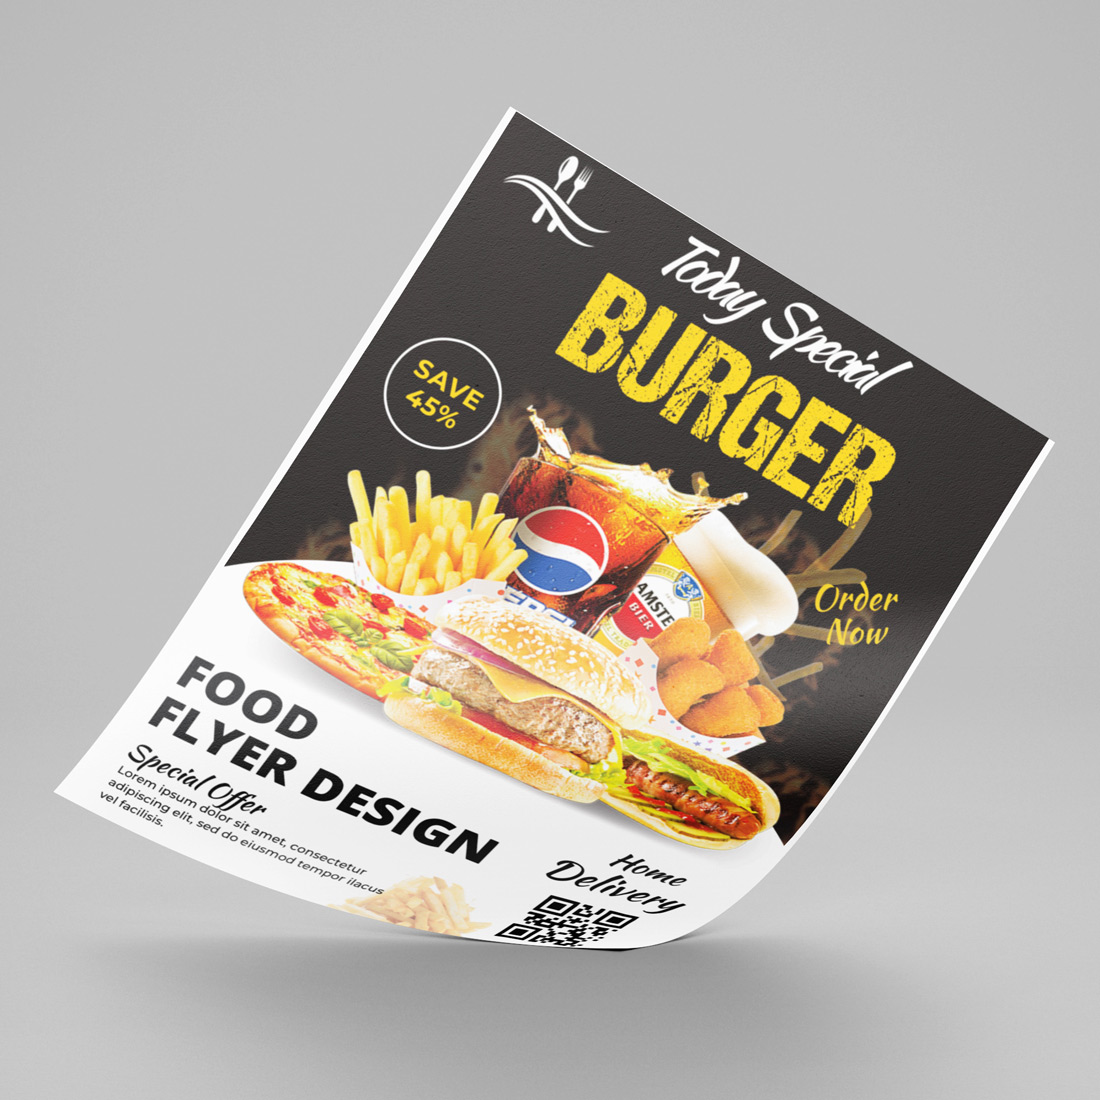 Food Flyer Design Template cover image.